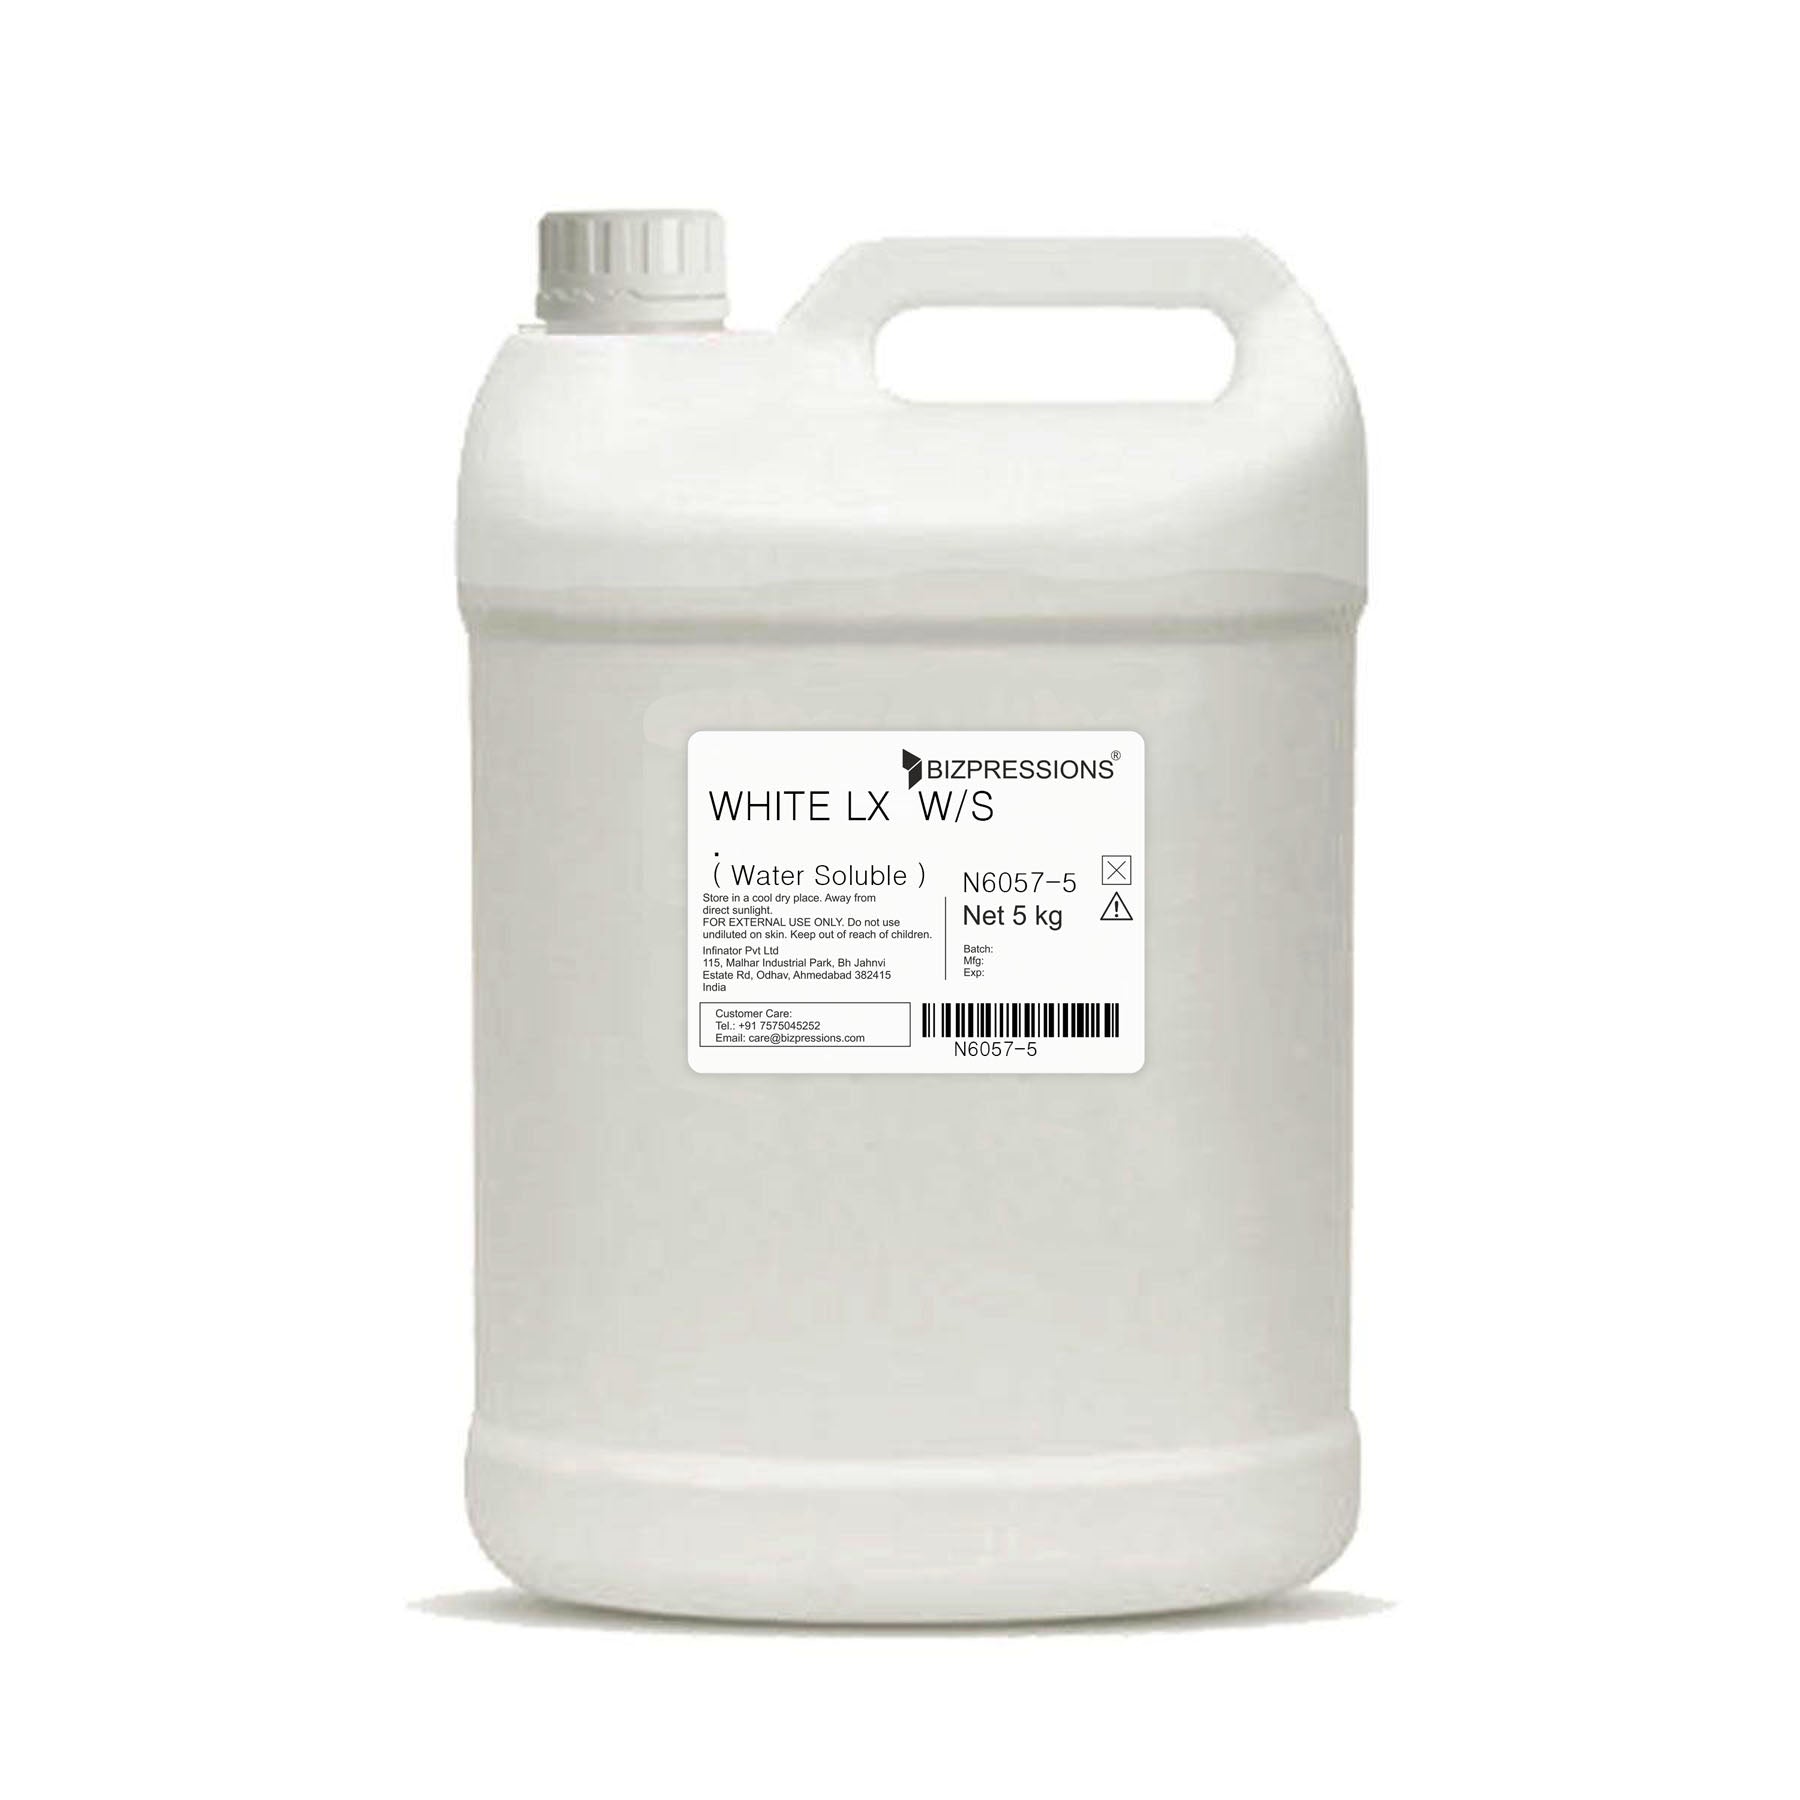 WHITE LX W/S - Fragrance ( Water Soluble ) - 5 kg